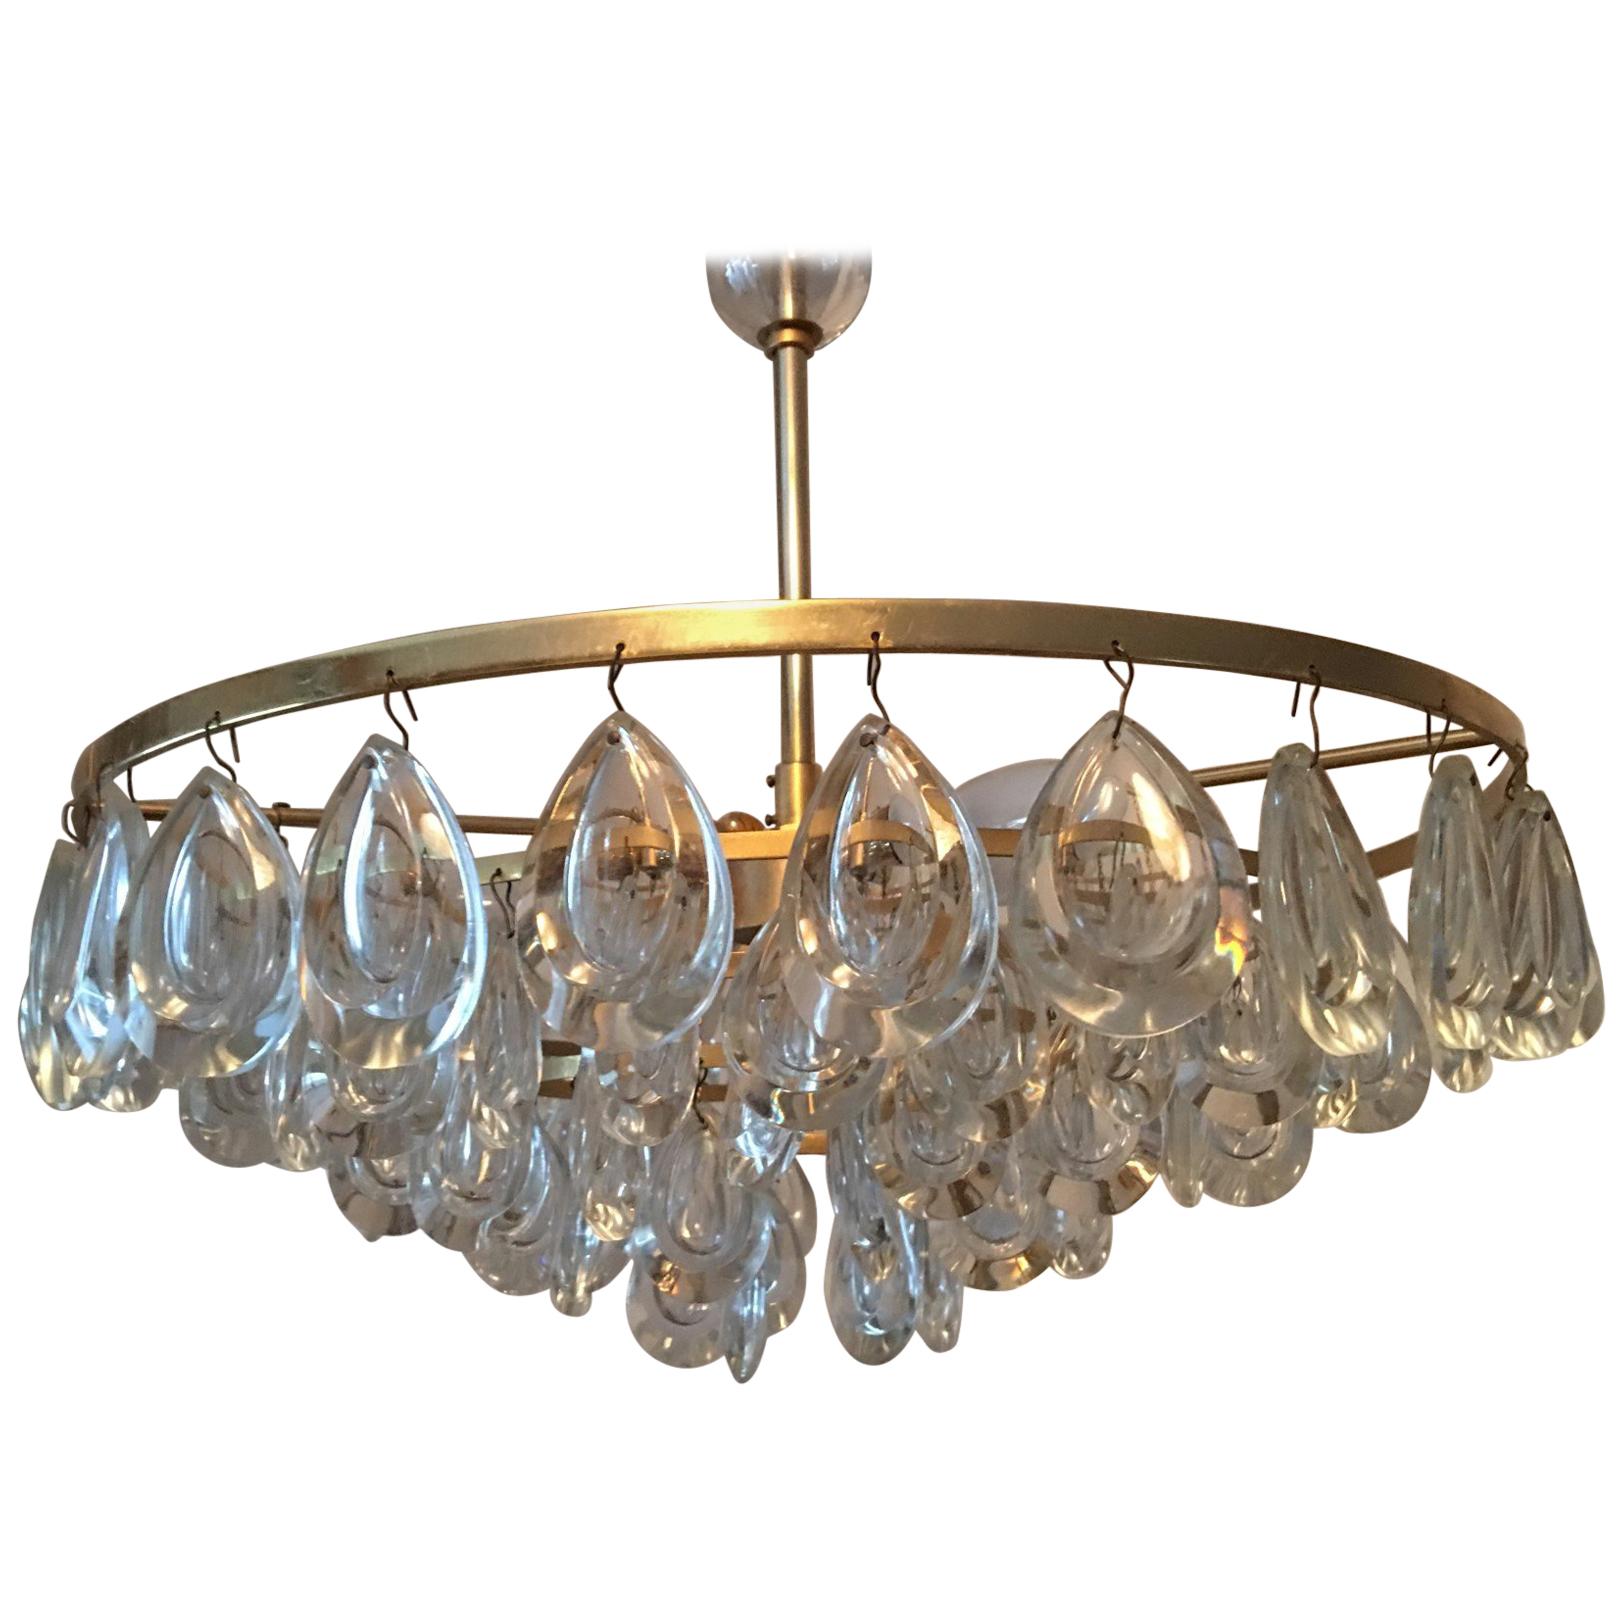 Five-Tiered crystal Glass Drop Chandelier by Palwa of Germany from the 1970s For Sale